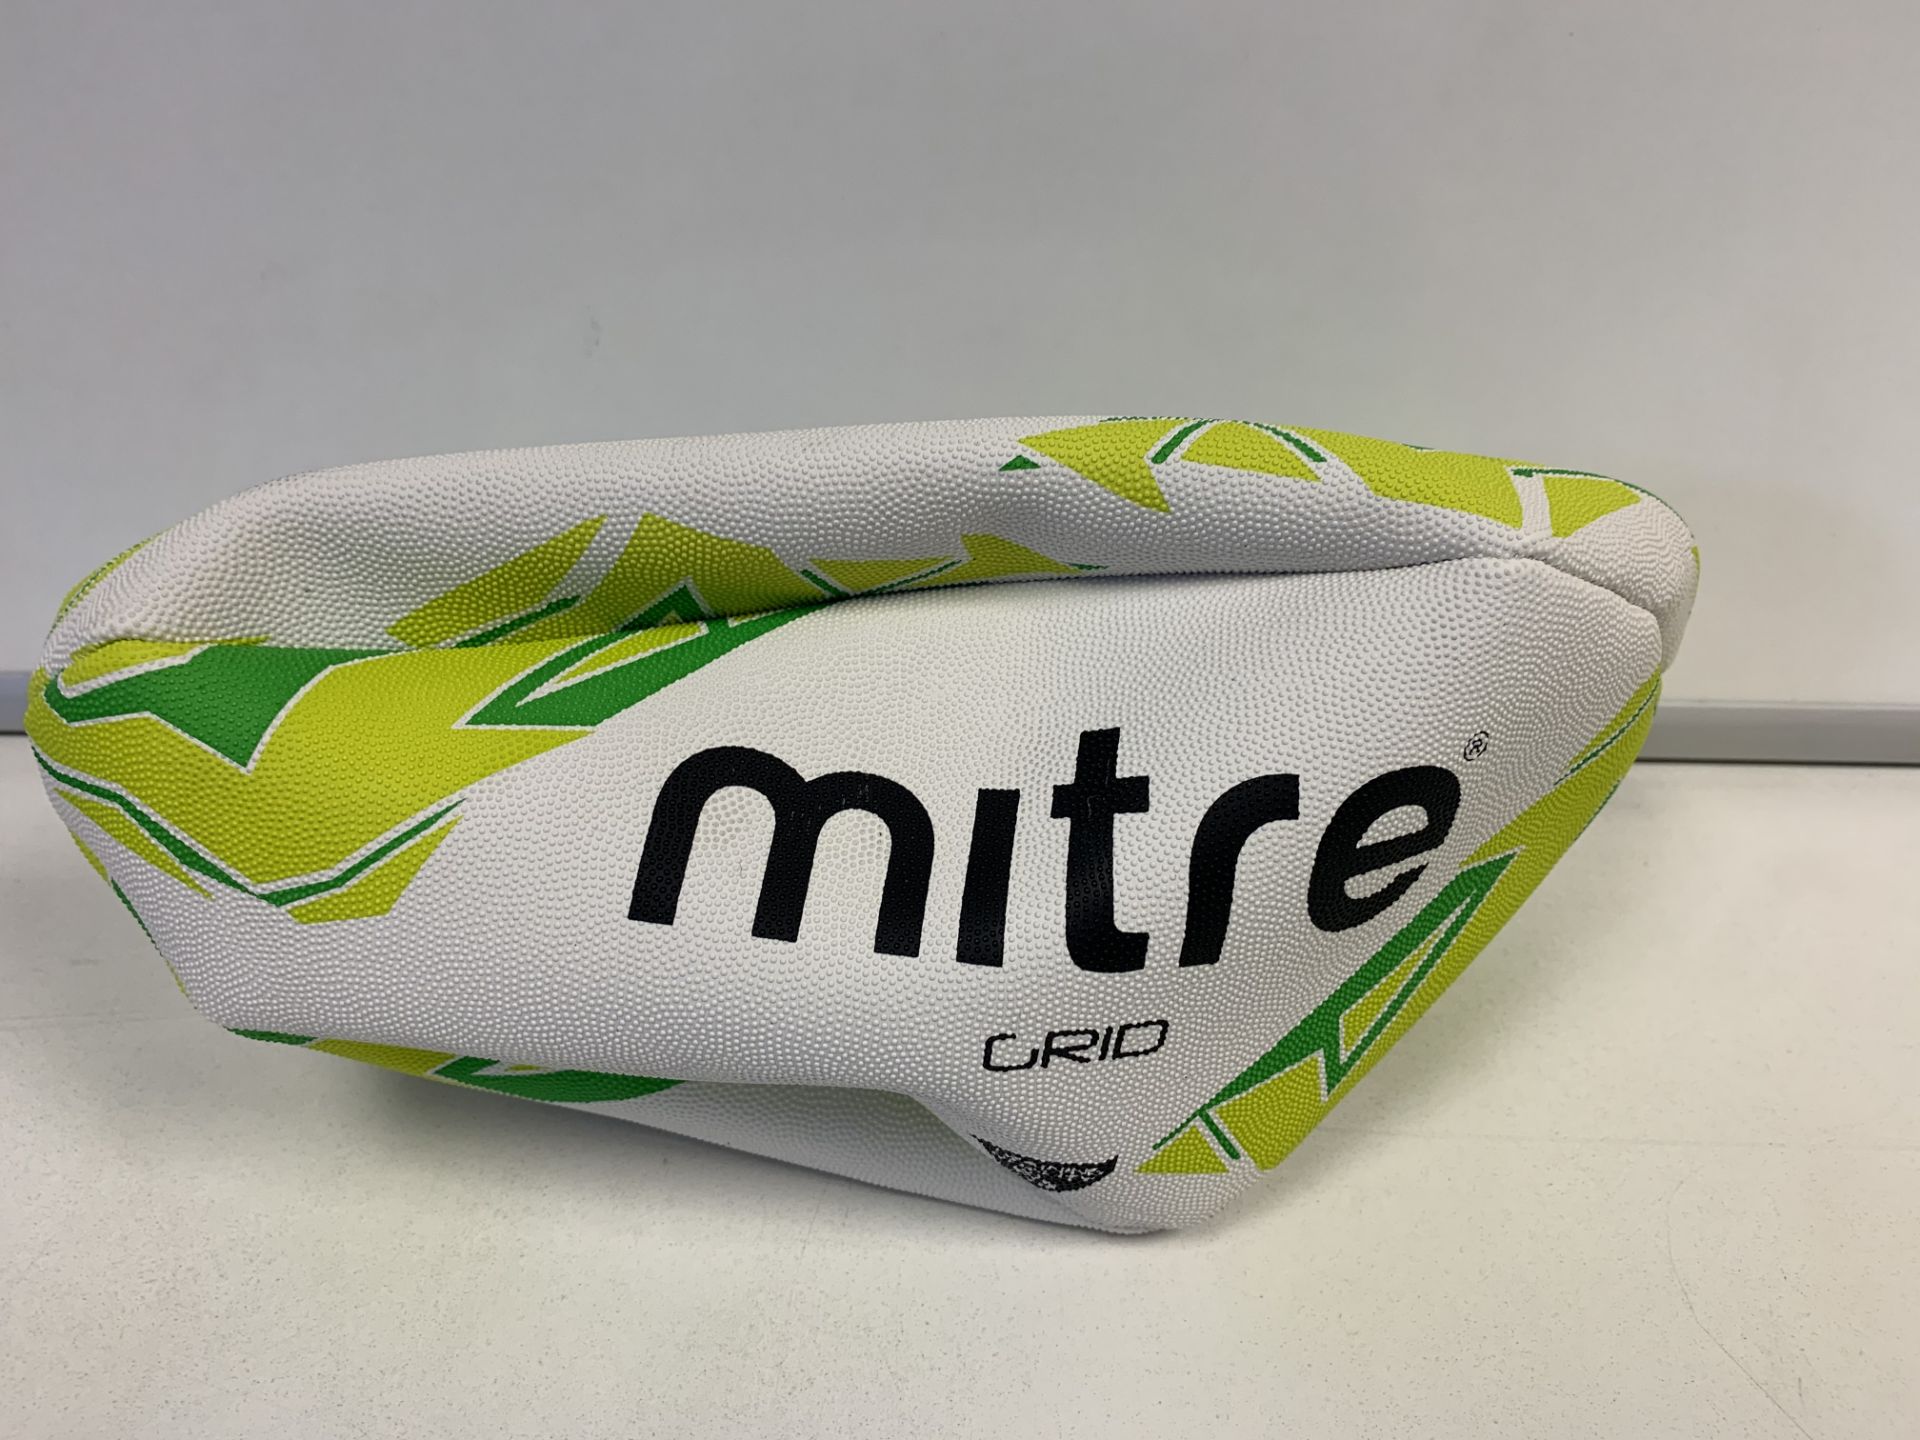 7 X BRAND NEW MITRE GRID RUGBY BALLS SIZE 5